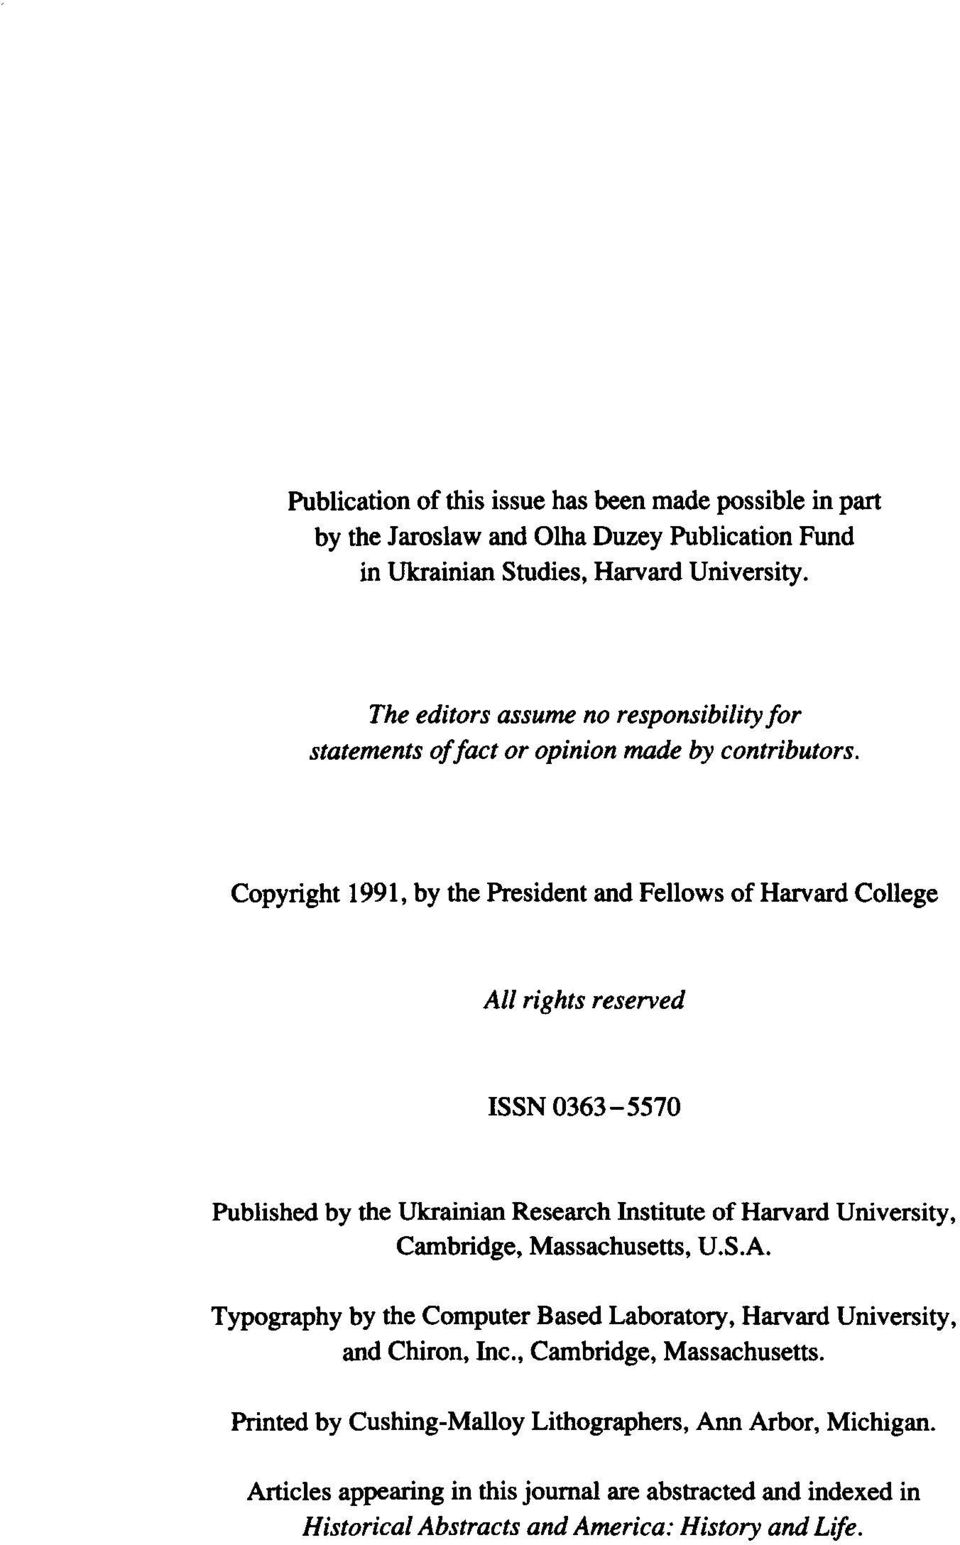 Copyright 1991, by the President and Fellows of Harvard College All rights reserved ISSN 0363-5570 Published by the Ukrainian Research Institute of Harvard University, Cambridge,